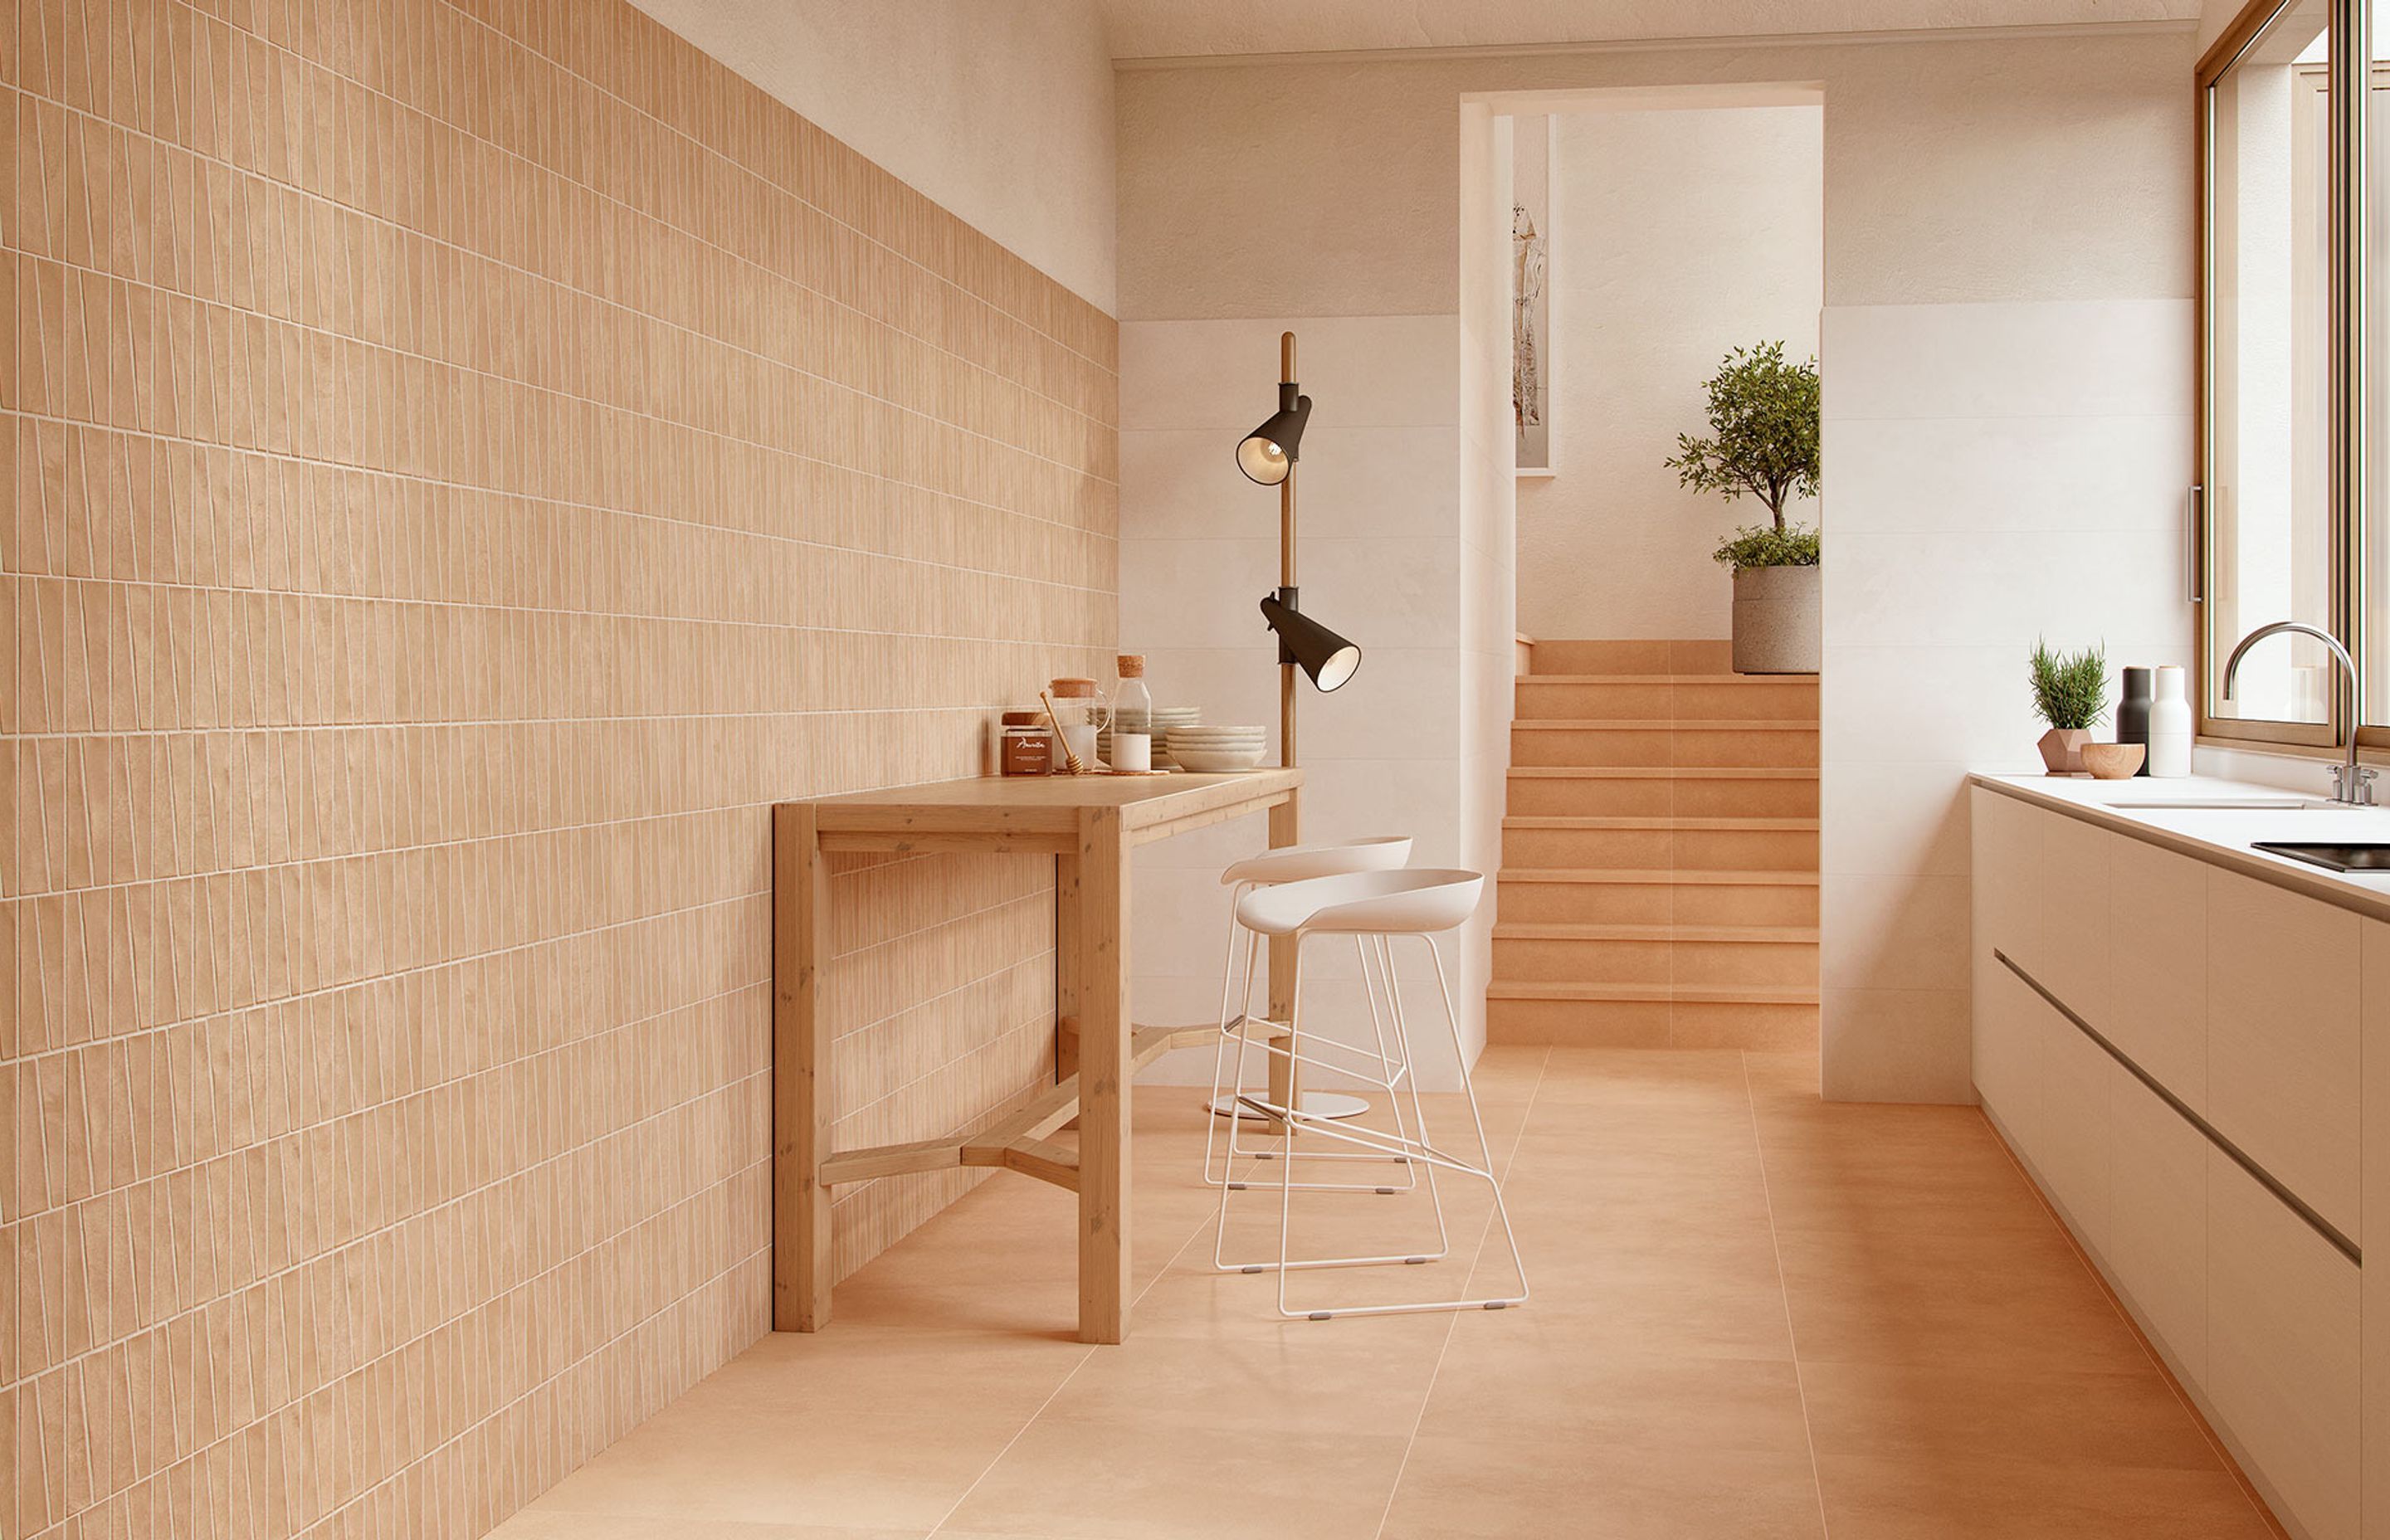 The Mediterranea Tesselado Décor is a classic example of the return of the terracotta look.